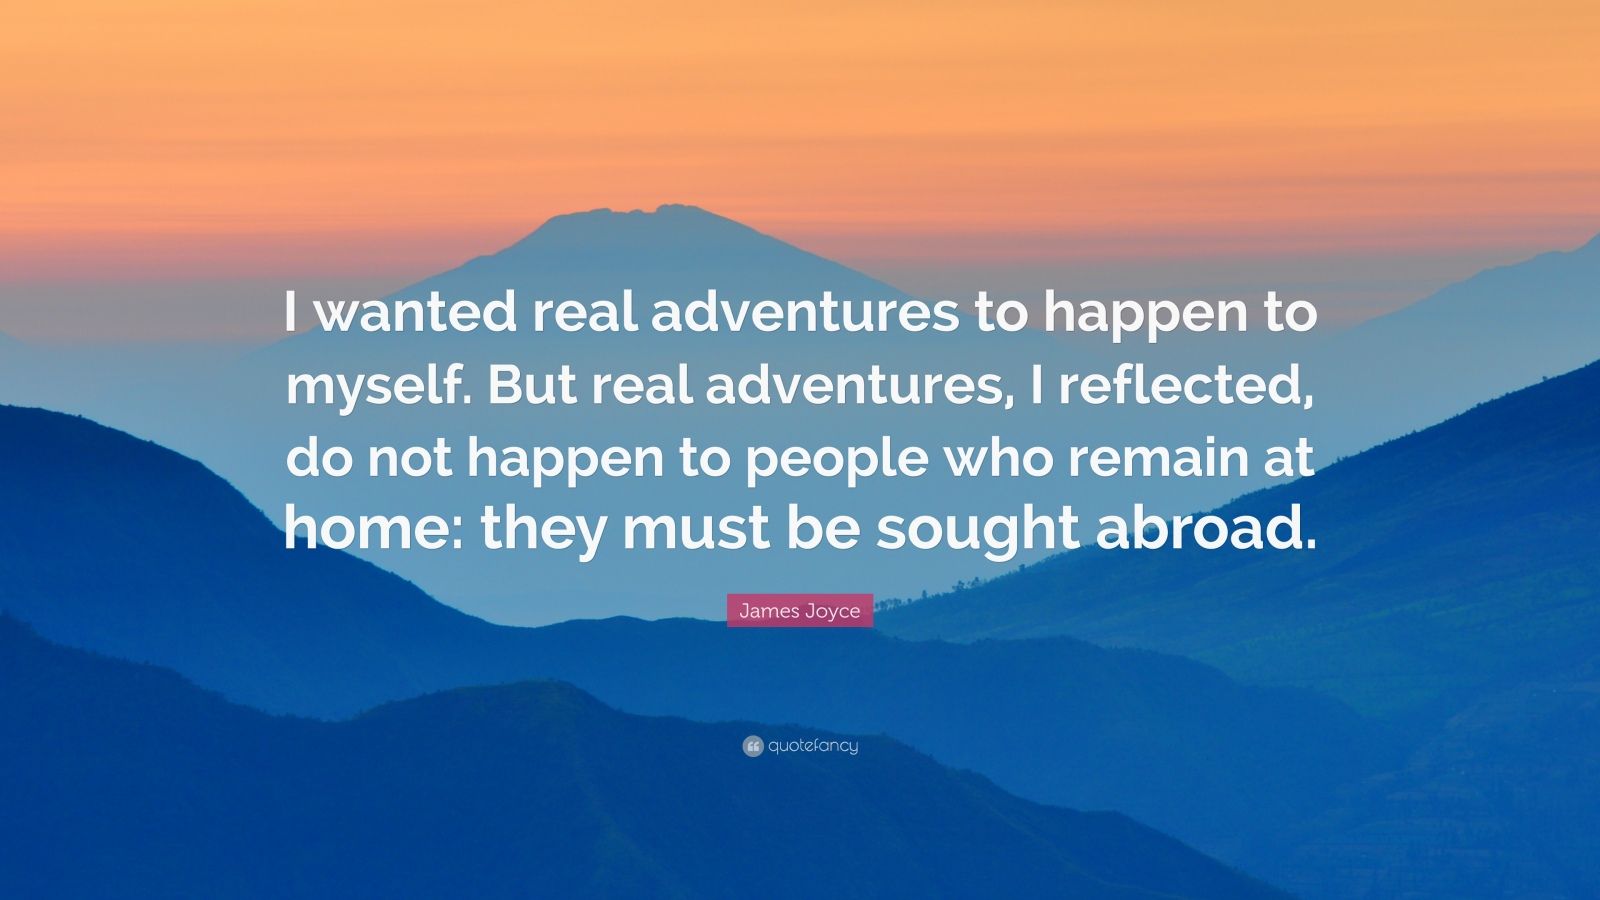 But real adventures, I reflected, do not